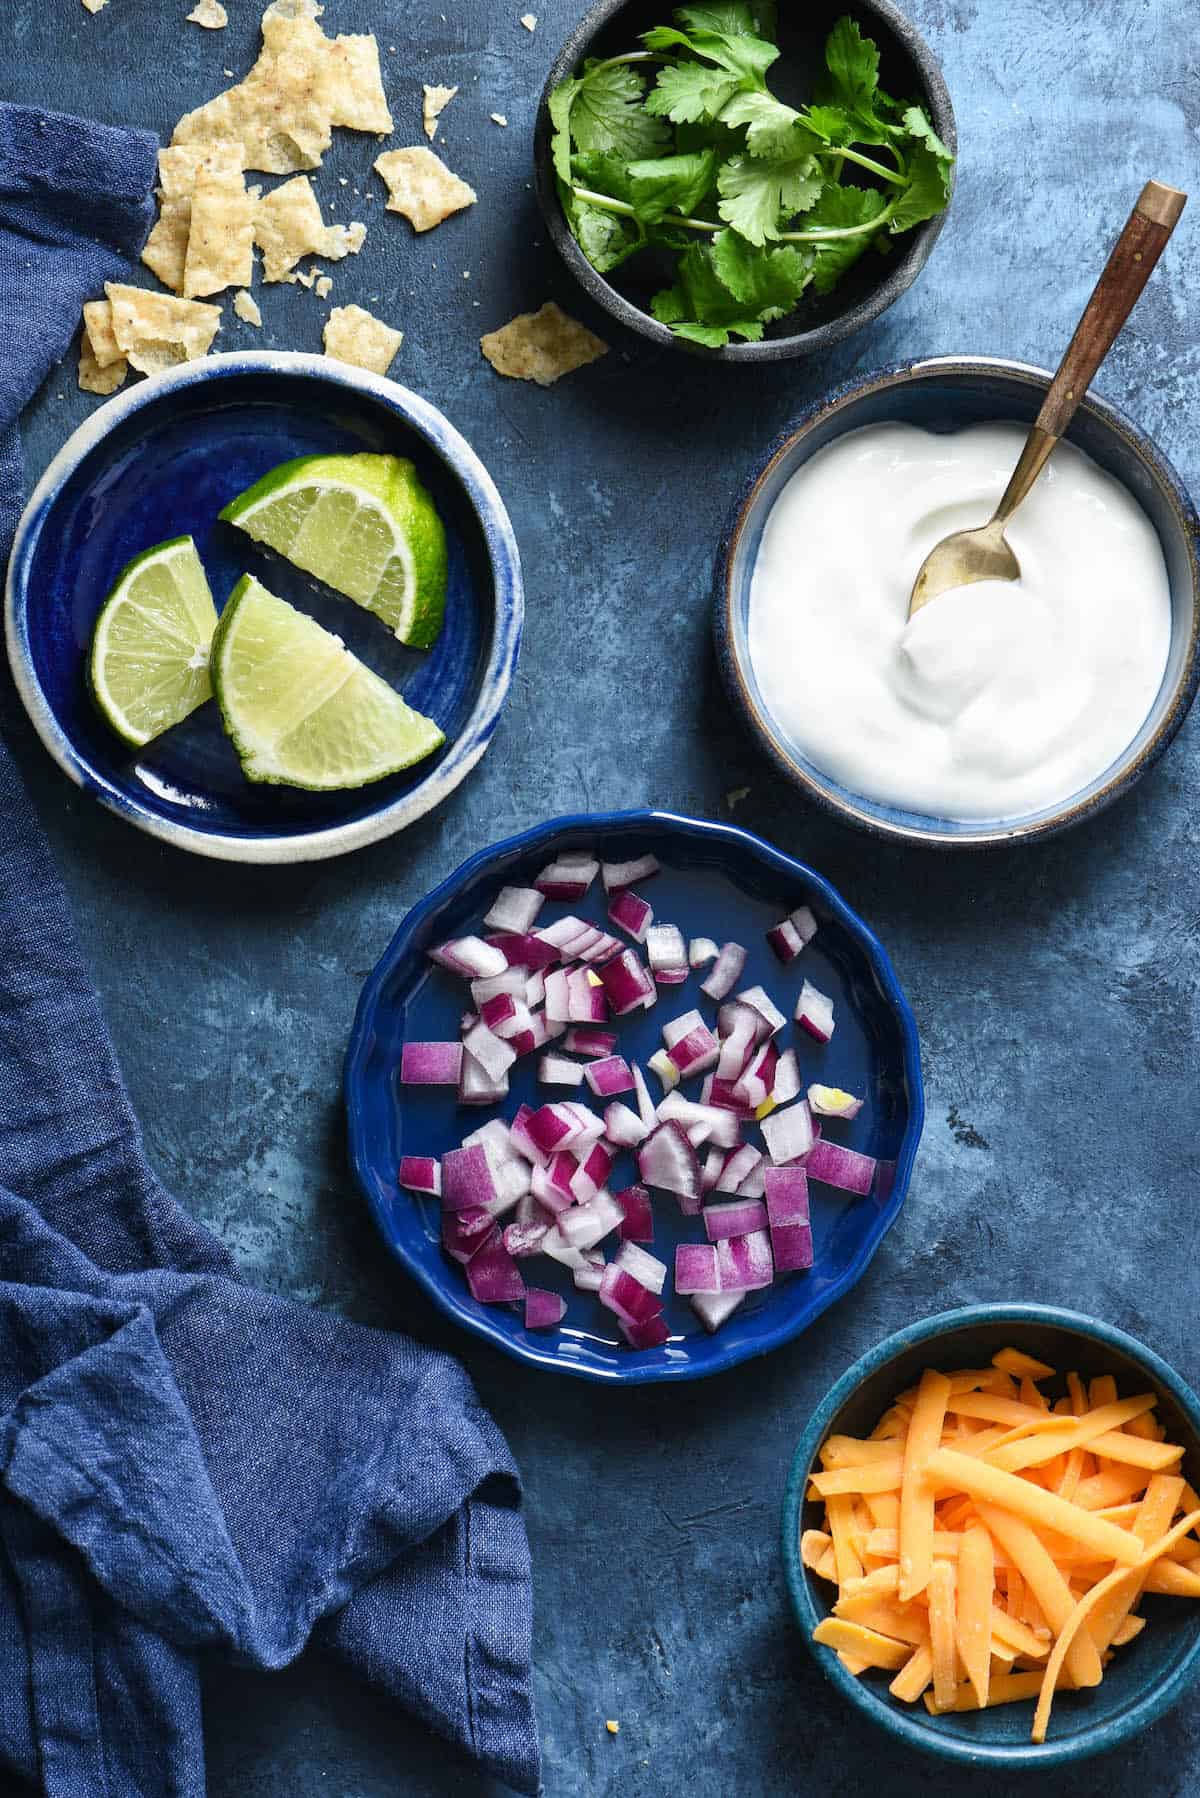 Bowls on blue background filled with garnishes for taco soup crock pot, including cilantro, limes, sour cream, red onion and shredded cheese.